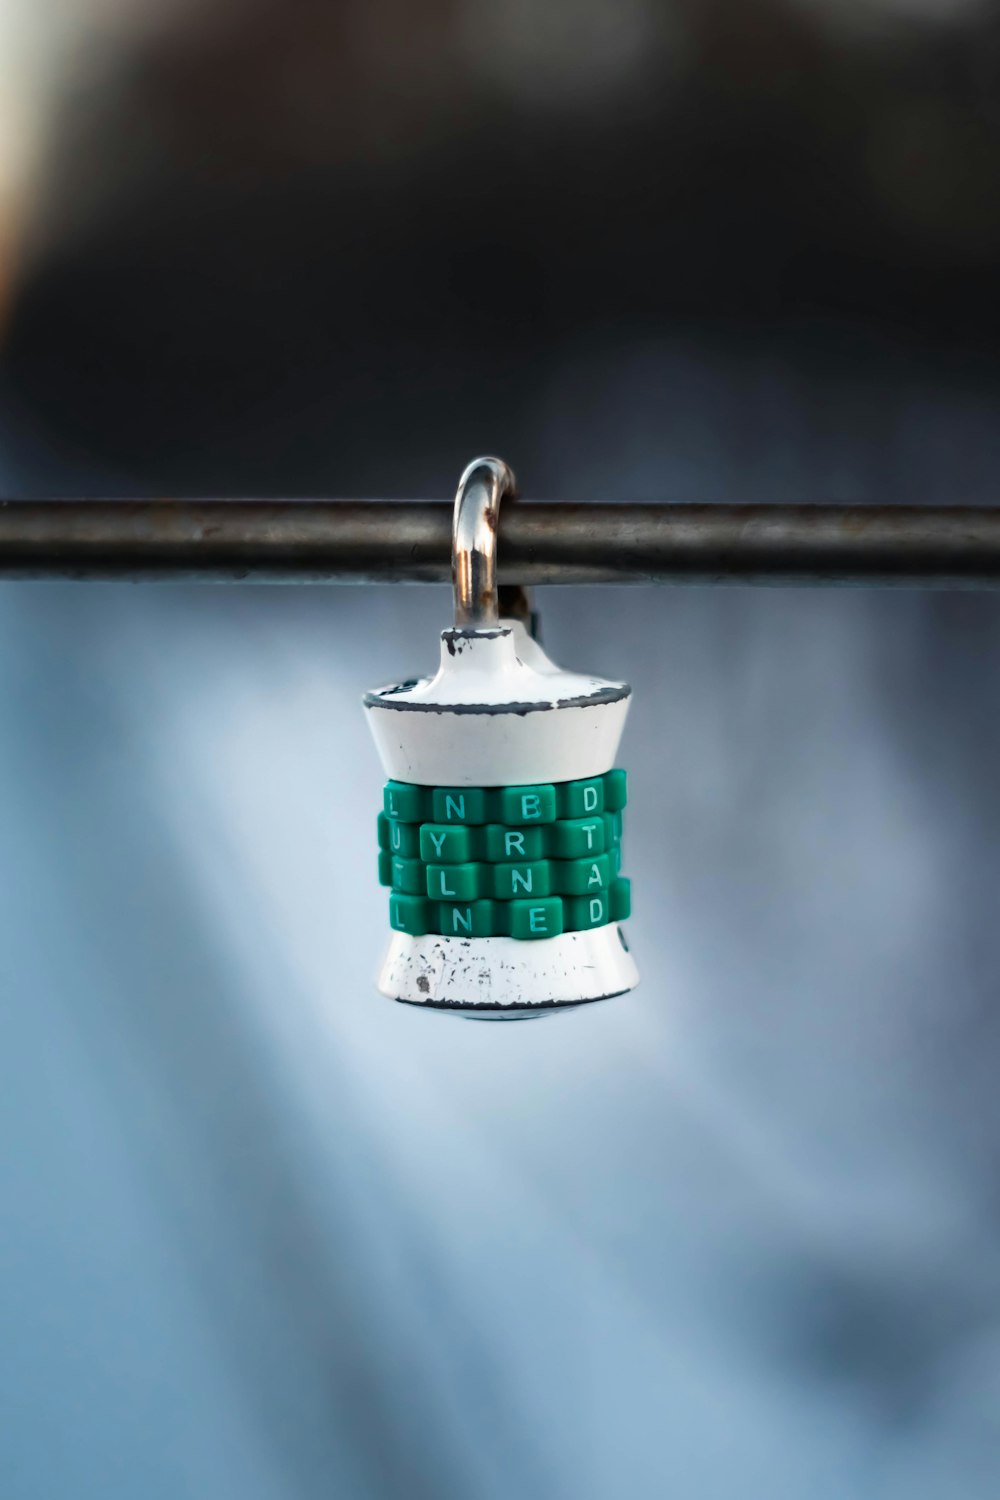 a green and white key chain attached to a metal pole